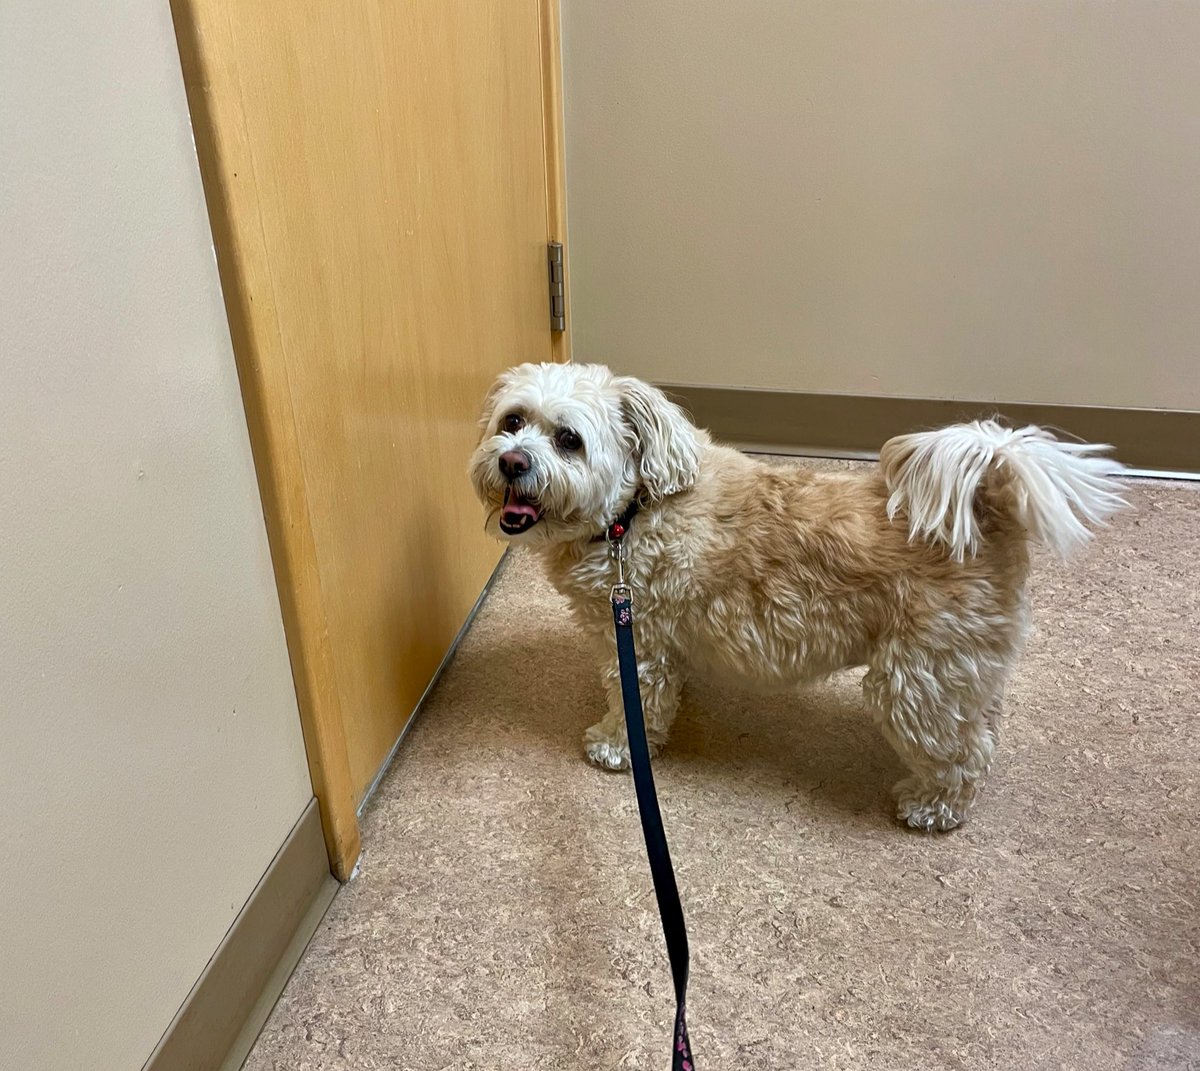 Friends,…I’ve had a ruff week! I had a bad tummy & my vet helped me feel so much better with medicine! Here is a pic of me there! The silver lining is that I get 4 small meals of chicken & rice for 3 days til I’m better! I ❤️ that!
#dogs #dogsoftwitter #weekend #feelingbetter